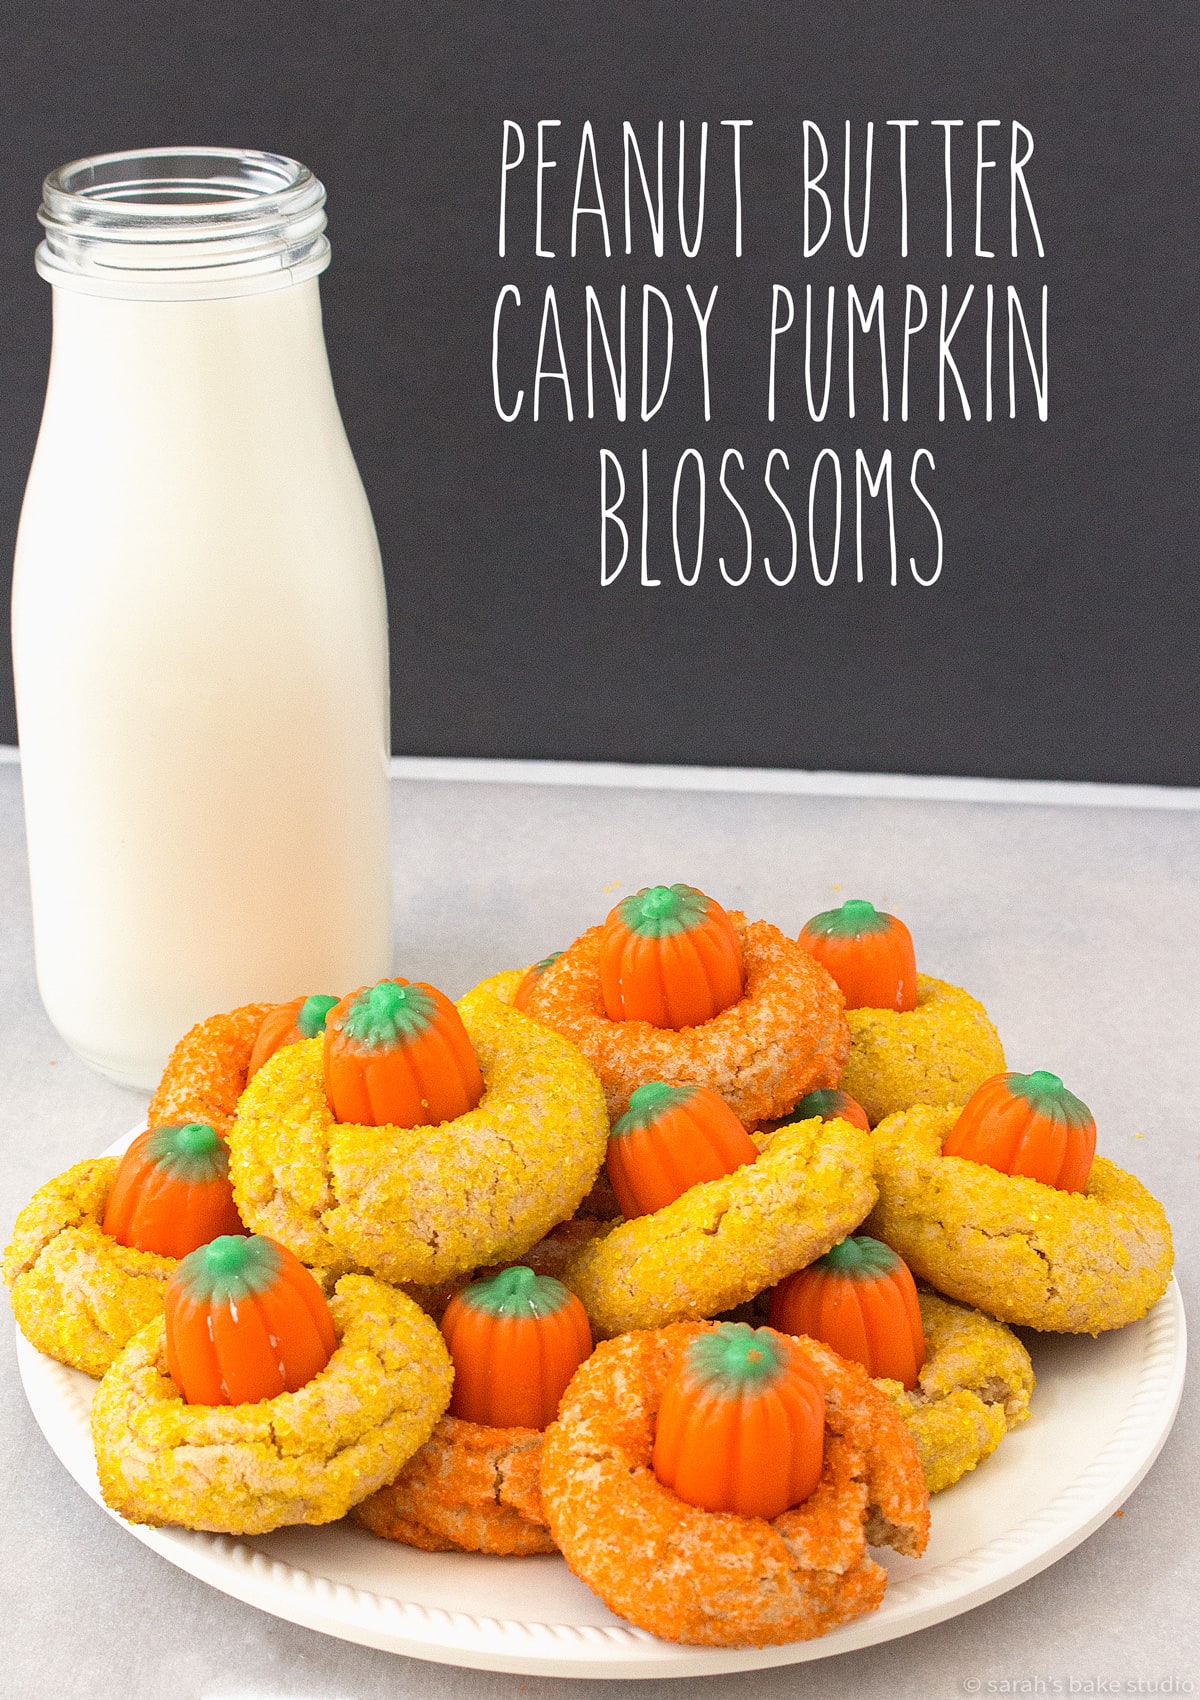 A plate of Peanut Butter Candy Pumpkin Blossoms with a glass of milk.